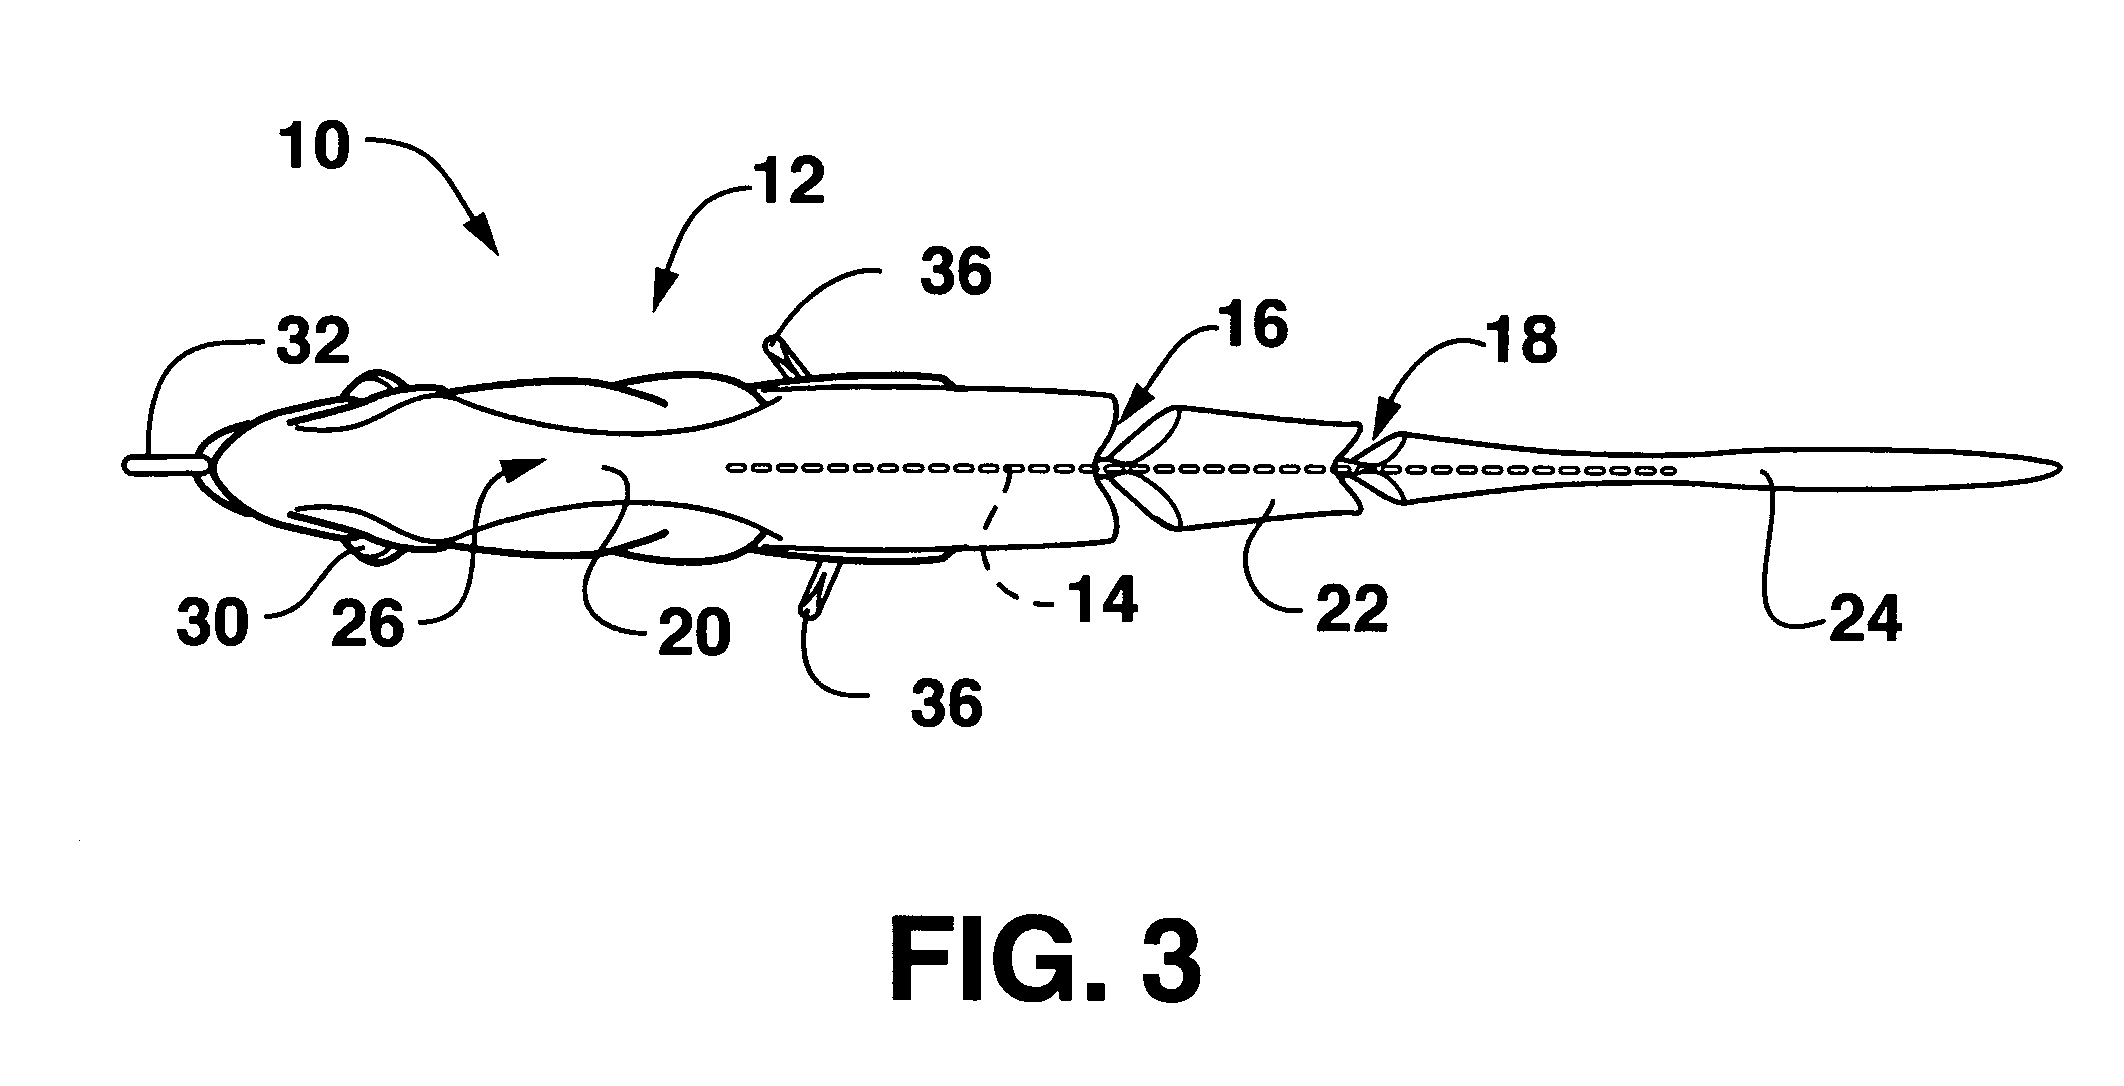 Apparatus and method for a reinforced segmented fishing lure